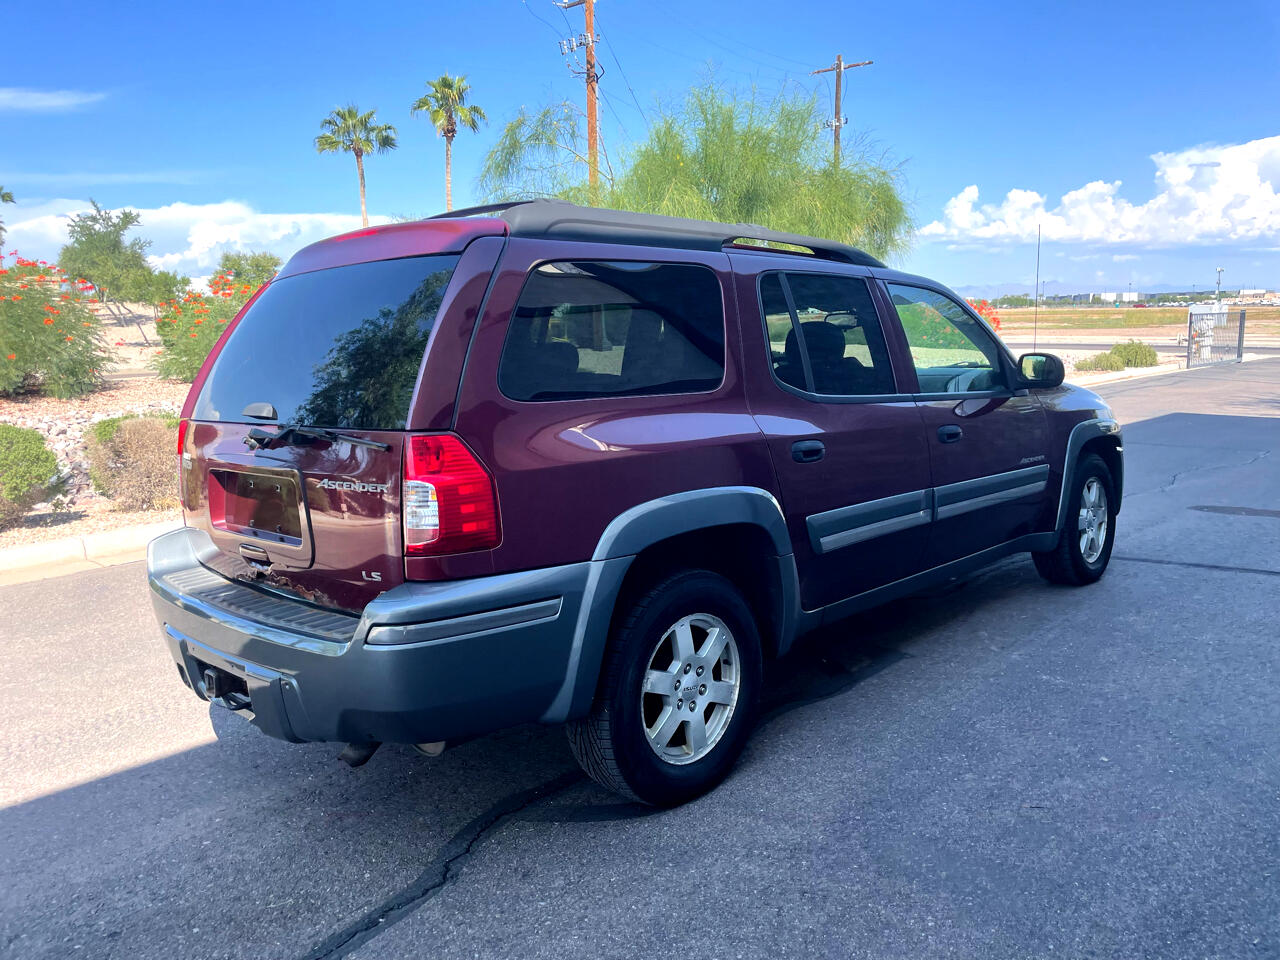 Used 2005 Isuzu Ascender 4dr 4WD EXT LS for Sale in Chandler AZ 85286  Auction Block Auto